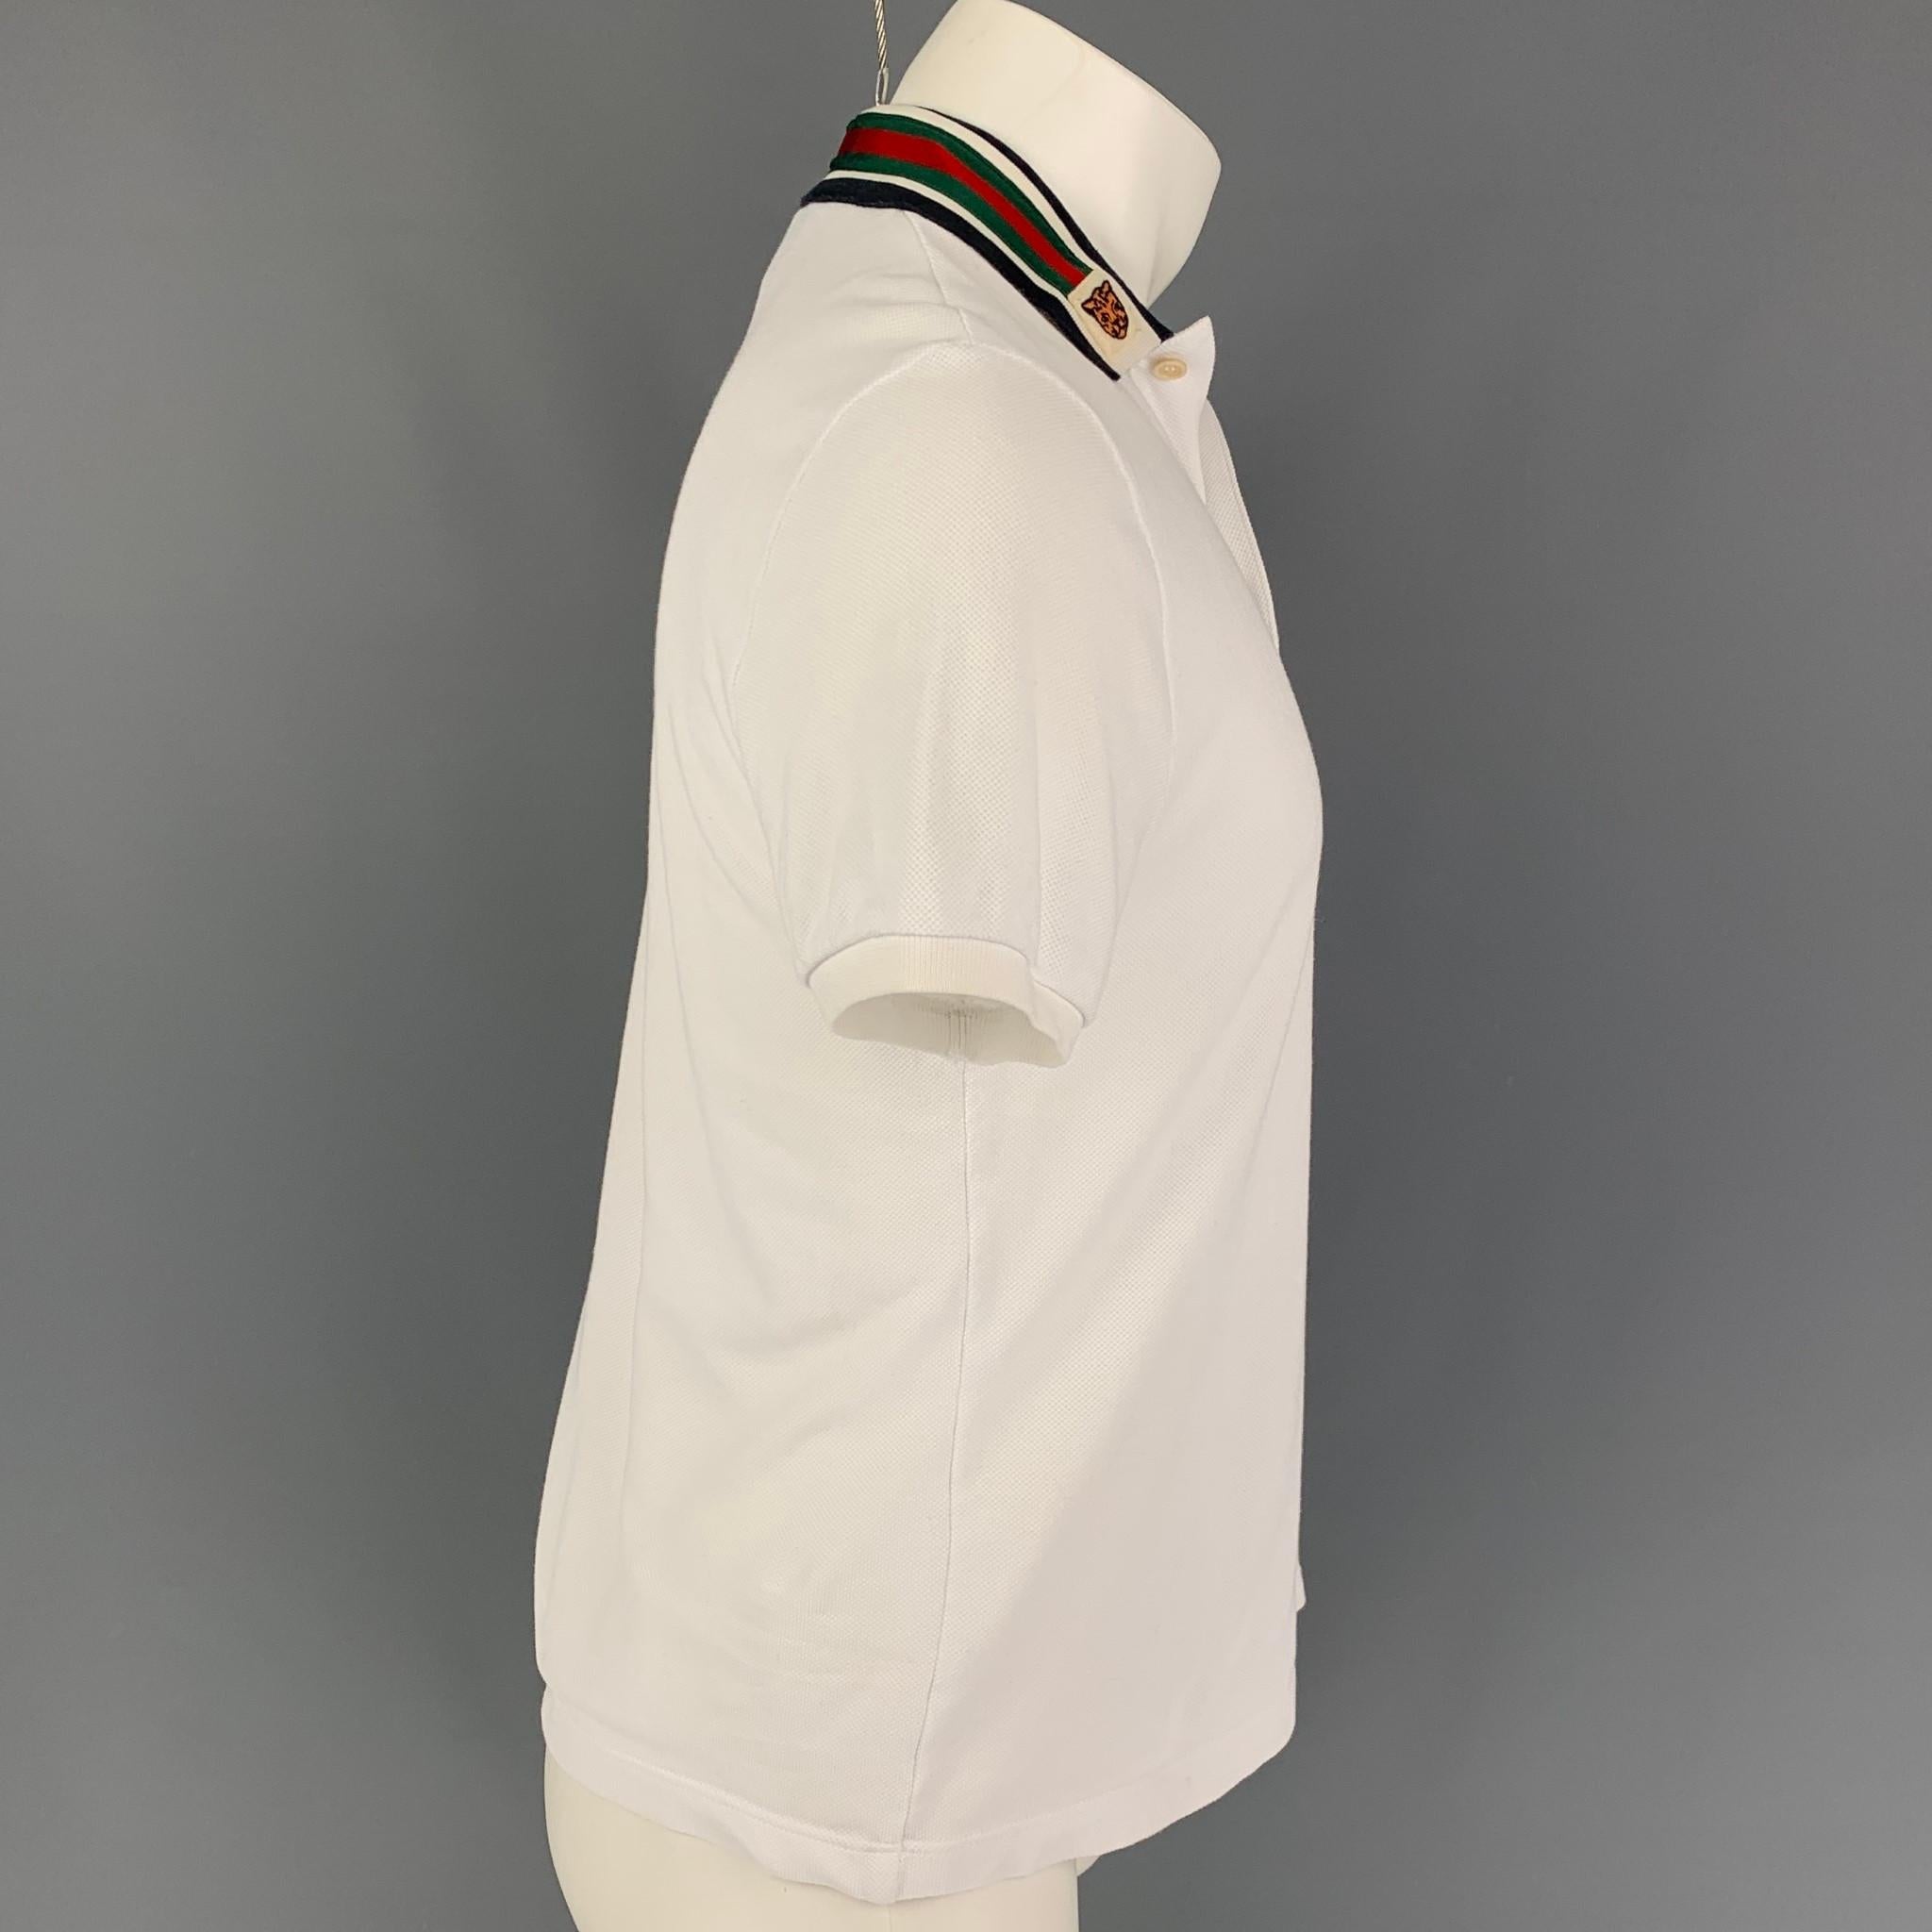 GUCCI polo comes in  white cotton featuring a stripe collar, tiger patch applique, and a half buttoned closure. Made in Italy. 

Very Good Pre-Owned Condition.
Marked: S

Measurements:

Shoulder: 18 in.
Chest: 38 in.
Sleeve: 9 in.
Length: 23.5 in. 